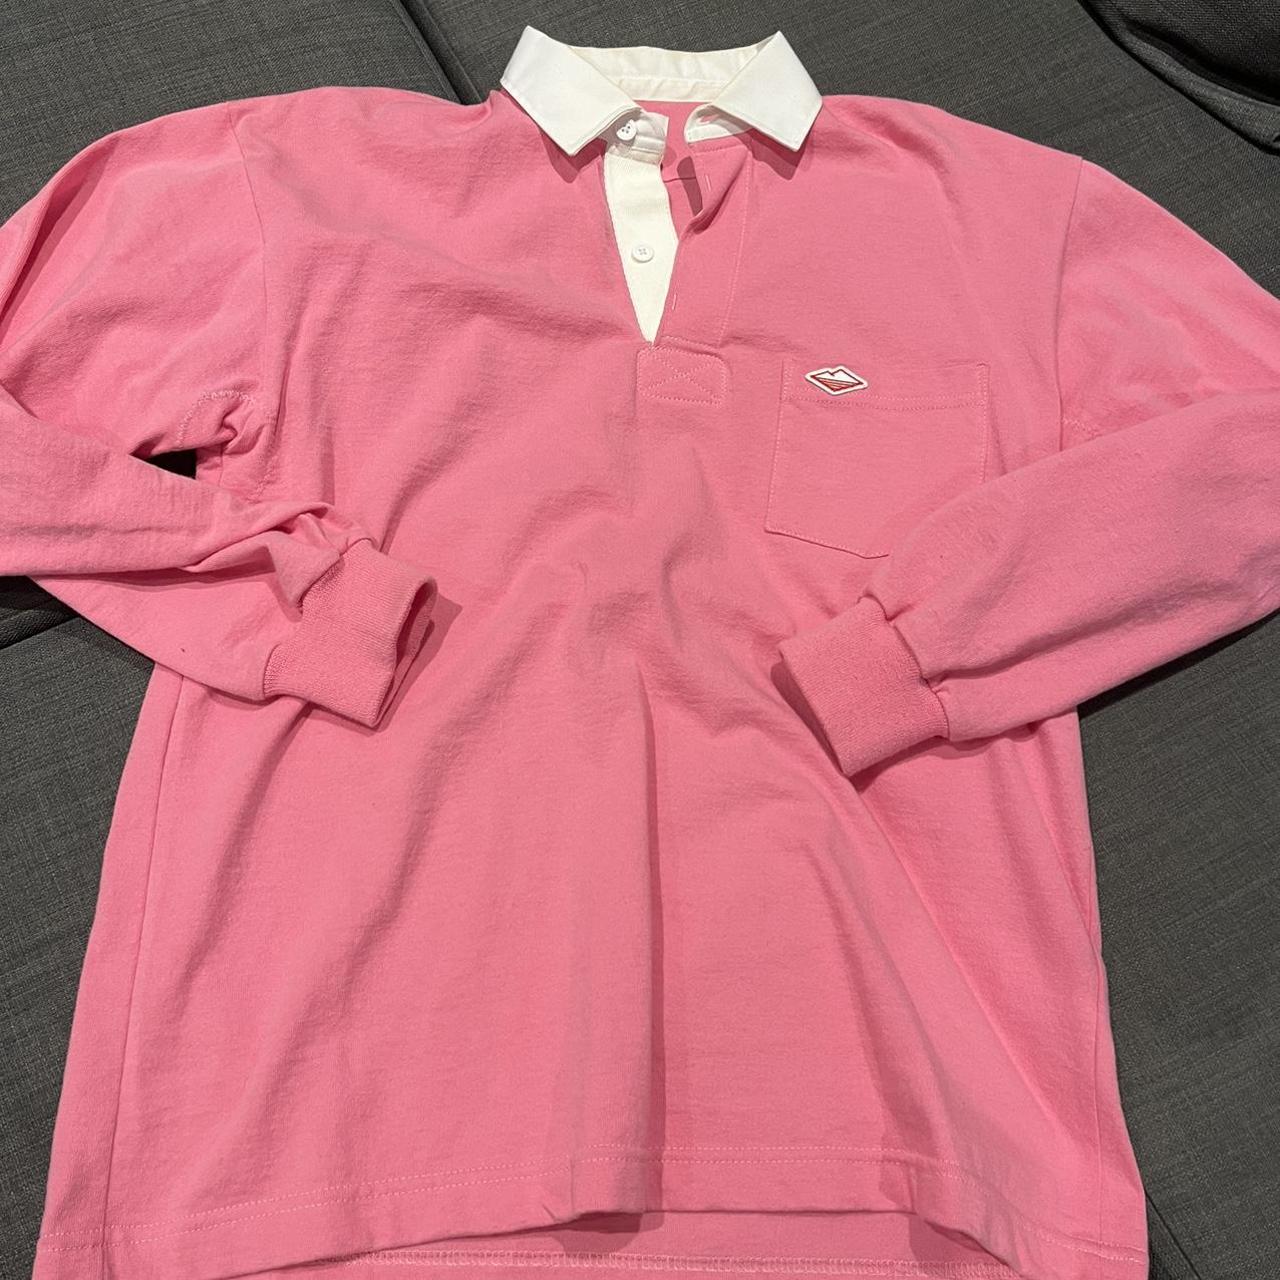 Battenwear Rugby Top Pink & white Mens size large... - Depop